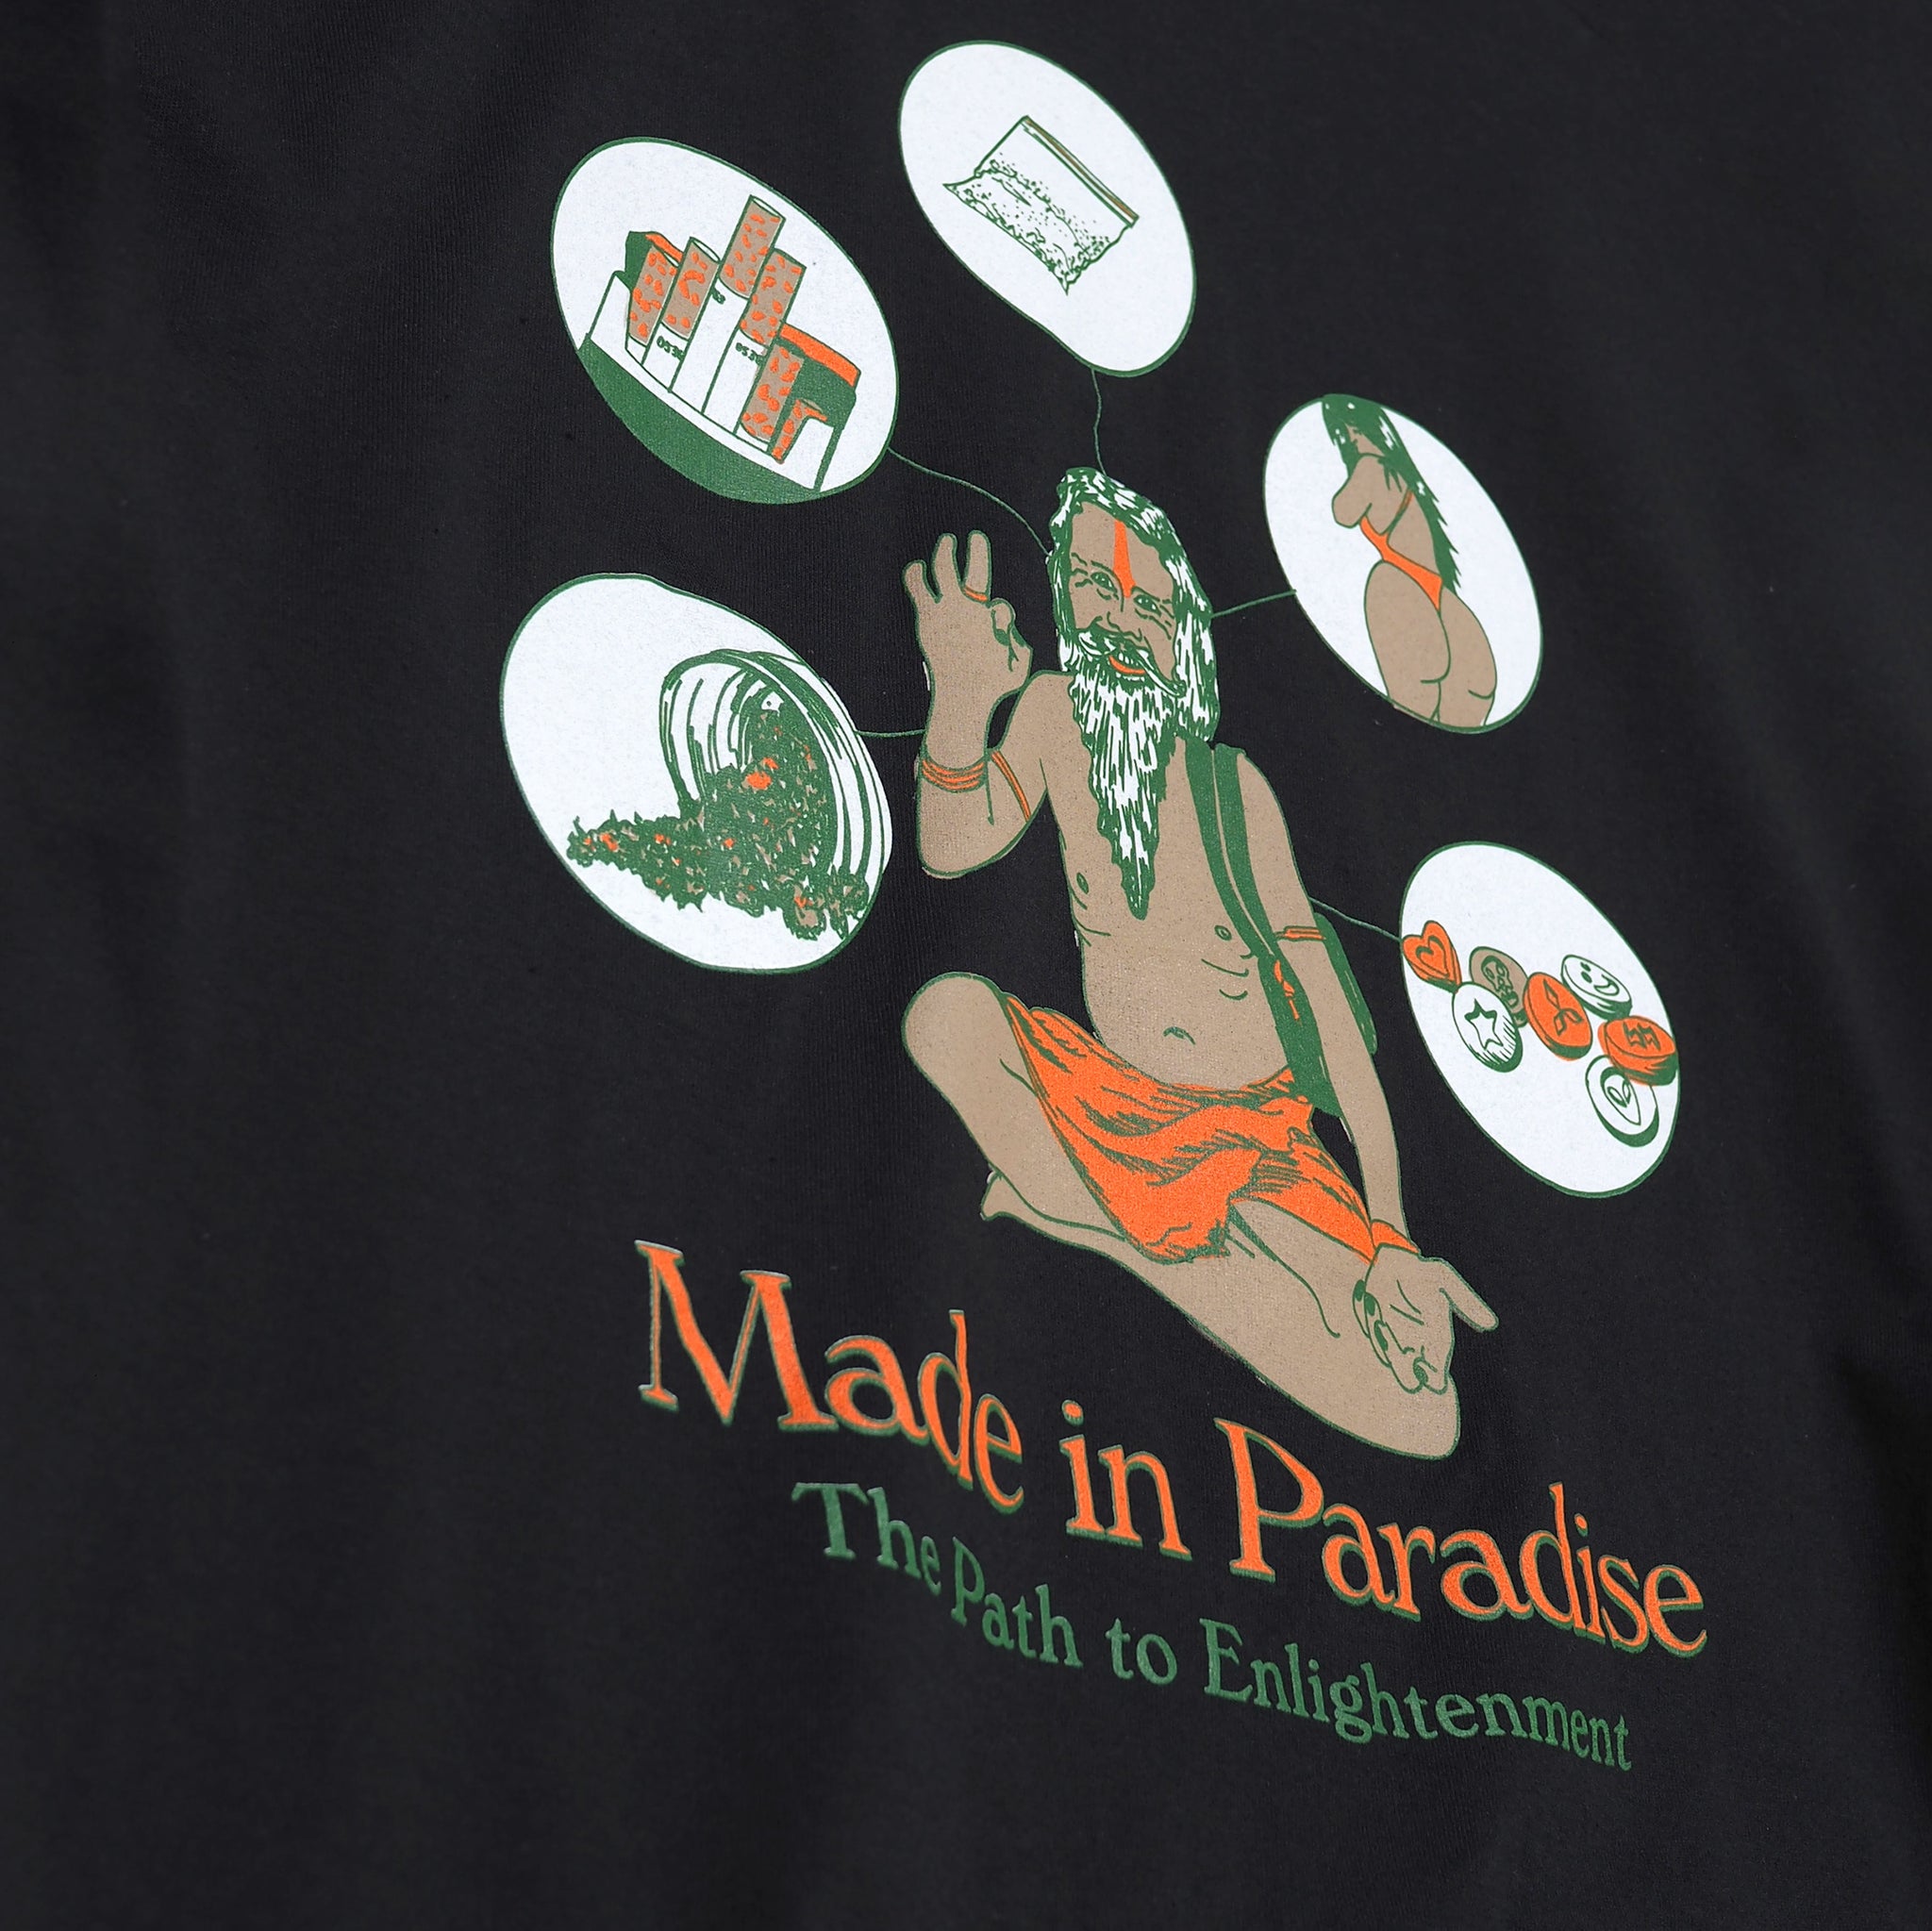 Close-up view of back graphic print of Made in Paradise Homegrown Collection "PATH TO ENLIGHTENMENT" black hoodie